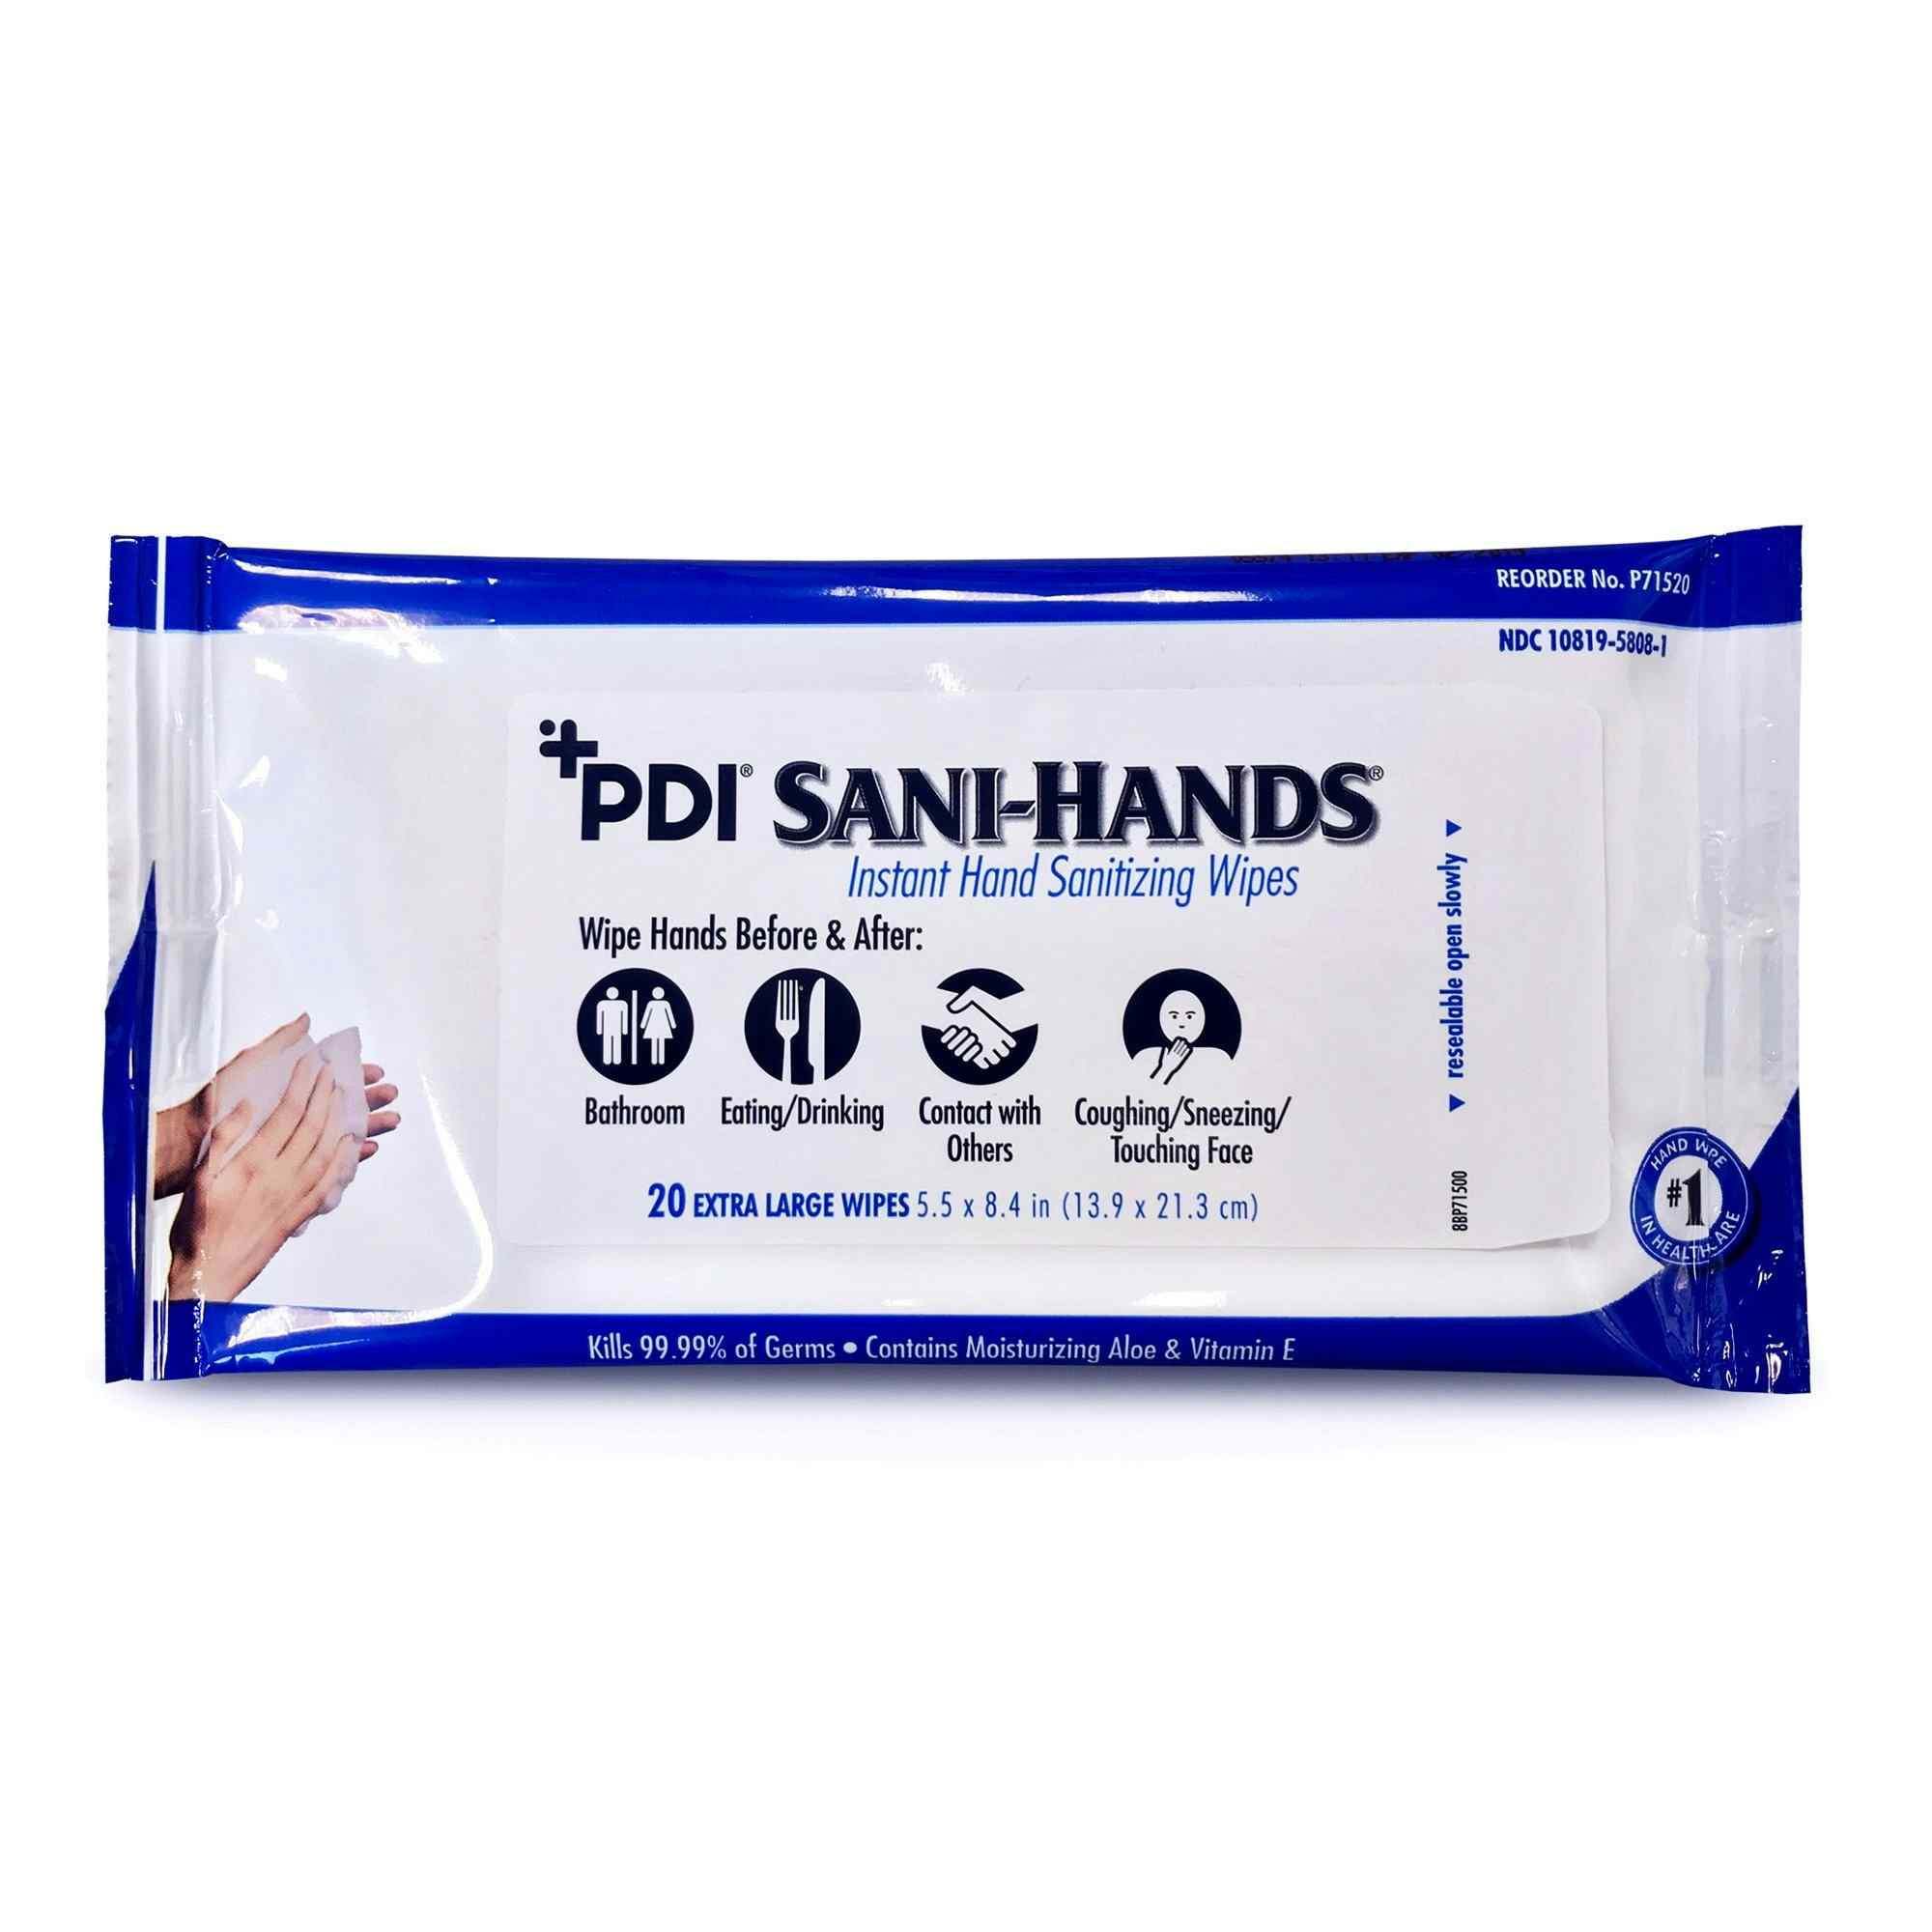 PDI Sani-Hands Instant Hand Sanitizing Wipes, P71520, Pack of 20